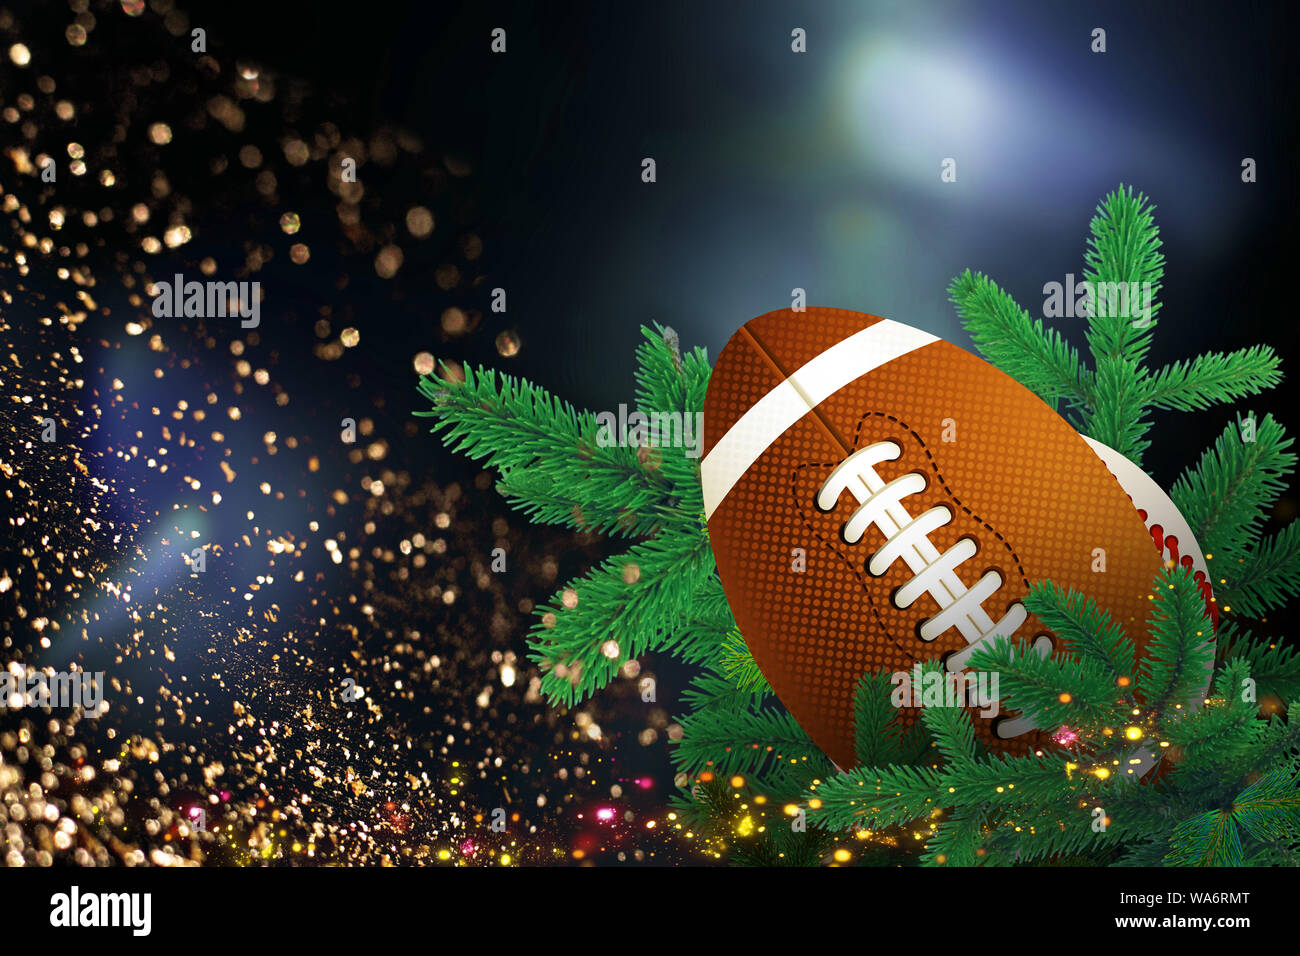 Rugby, Sports Christmas Card with festive decorations. Stock Photo